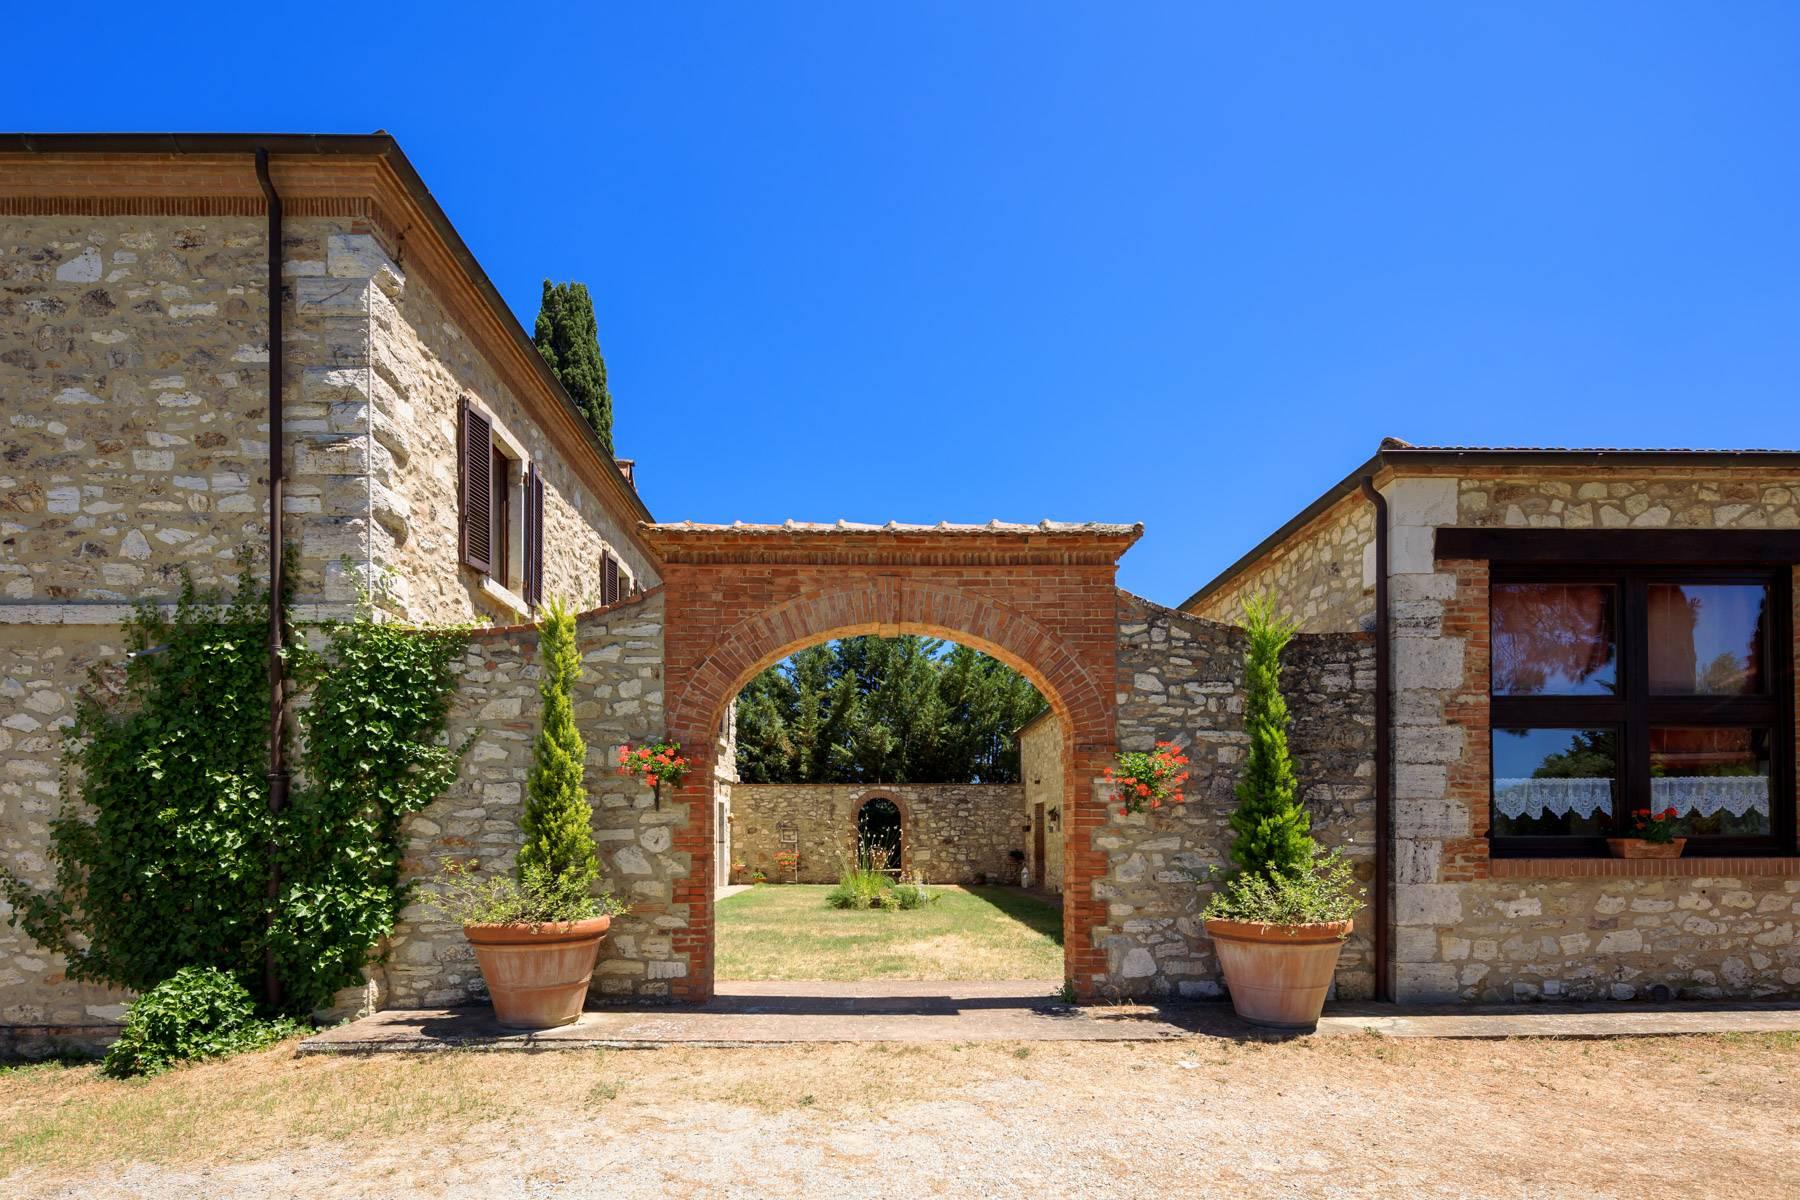 Historical country house in the heart of Crete Senesi with pool - 3